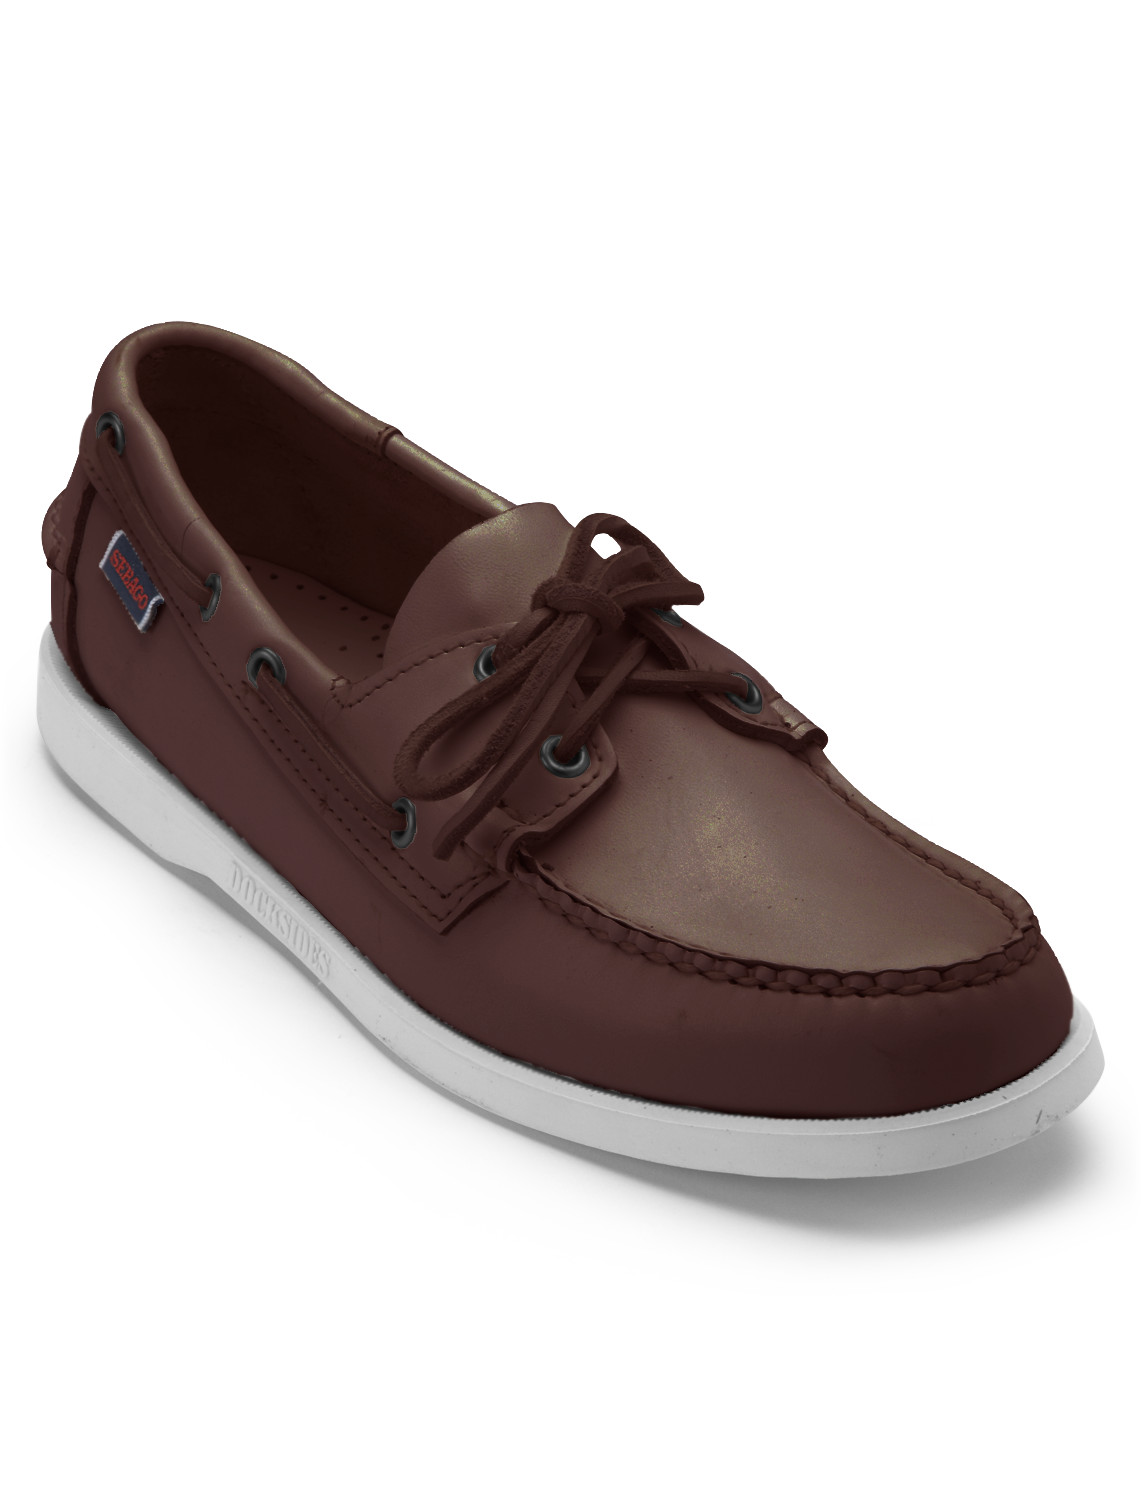 Polo Ralph Lauren® Parkstone Low Boat Shoes | Available in 4 colors ...